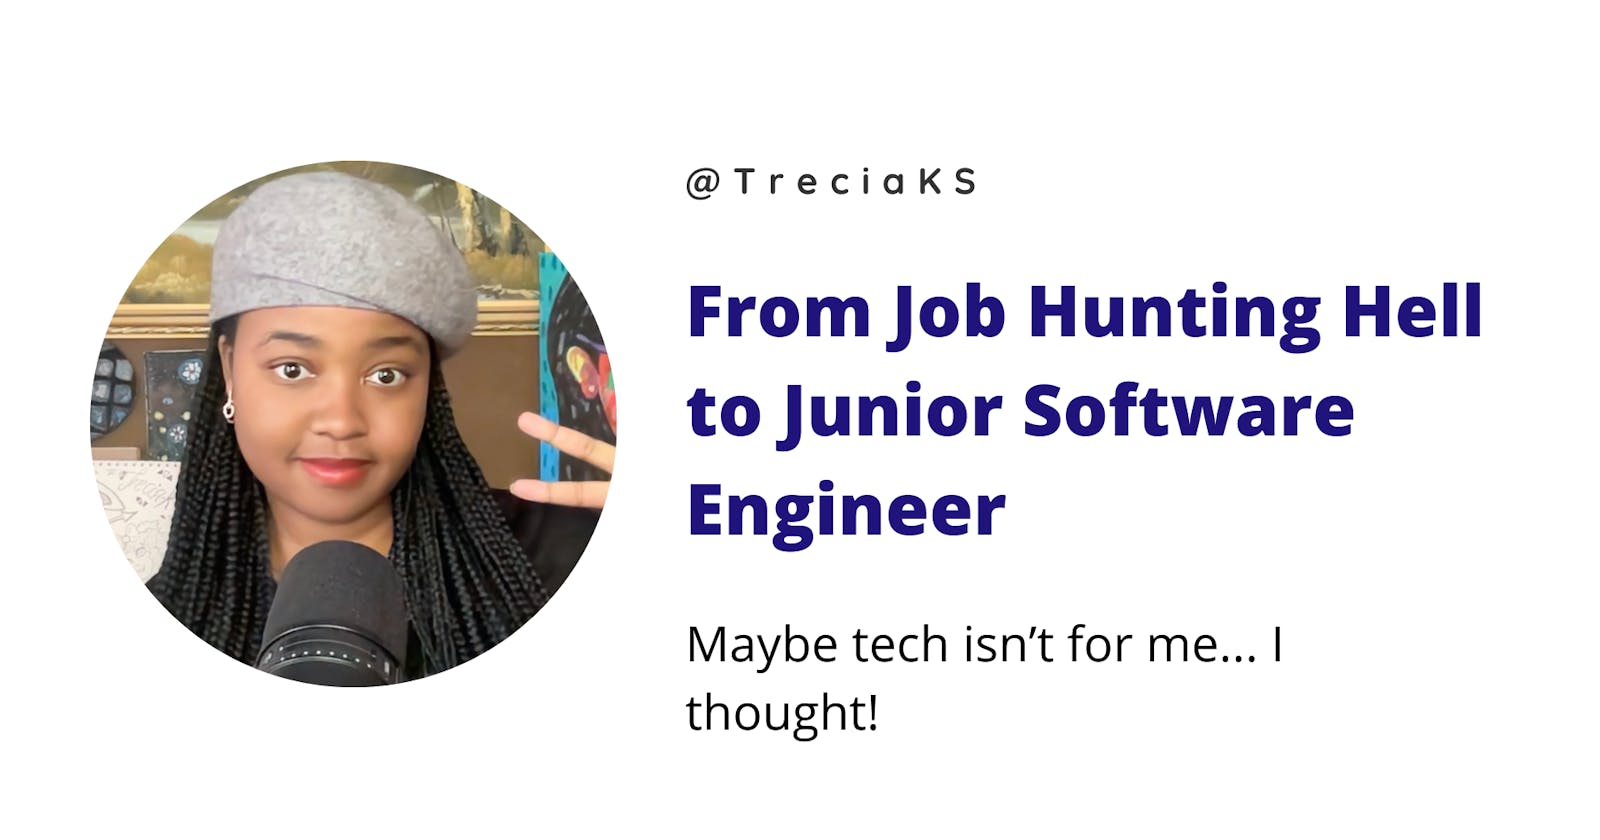 From Job Hunting Hell to Junior Software Engineer